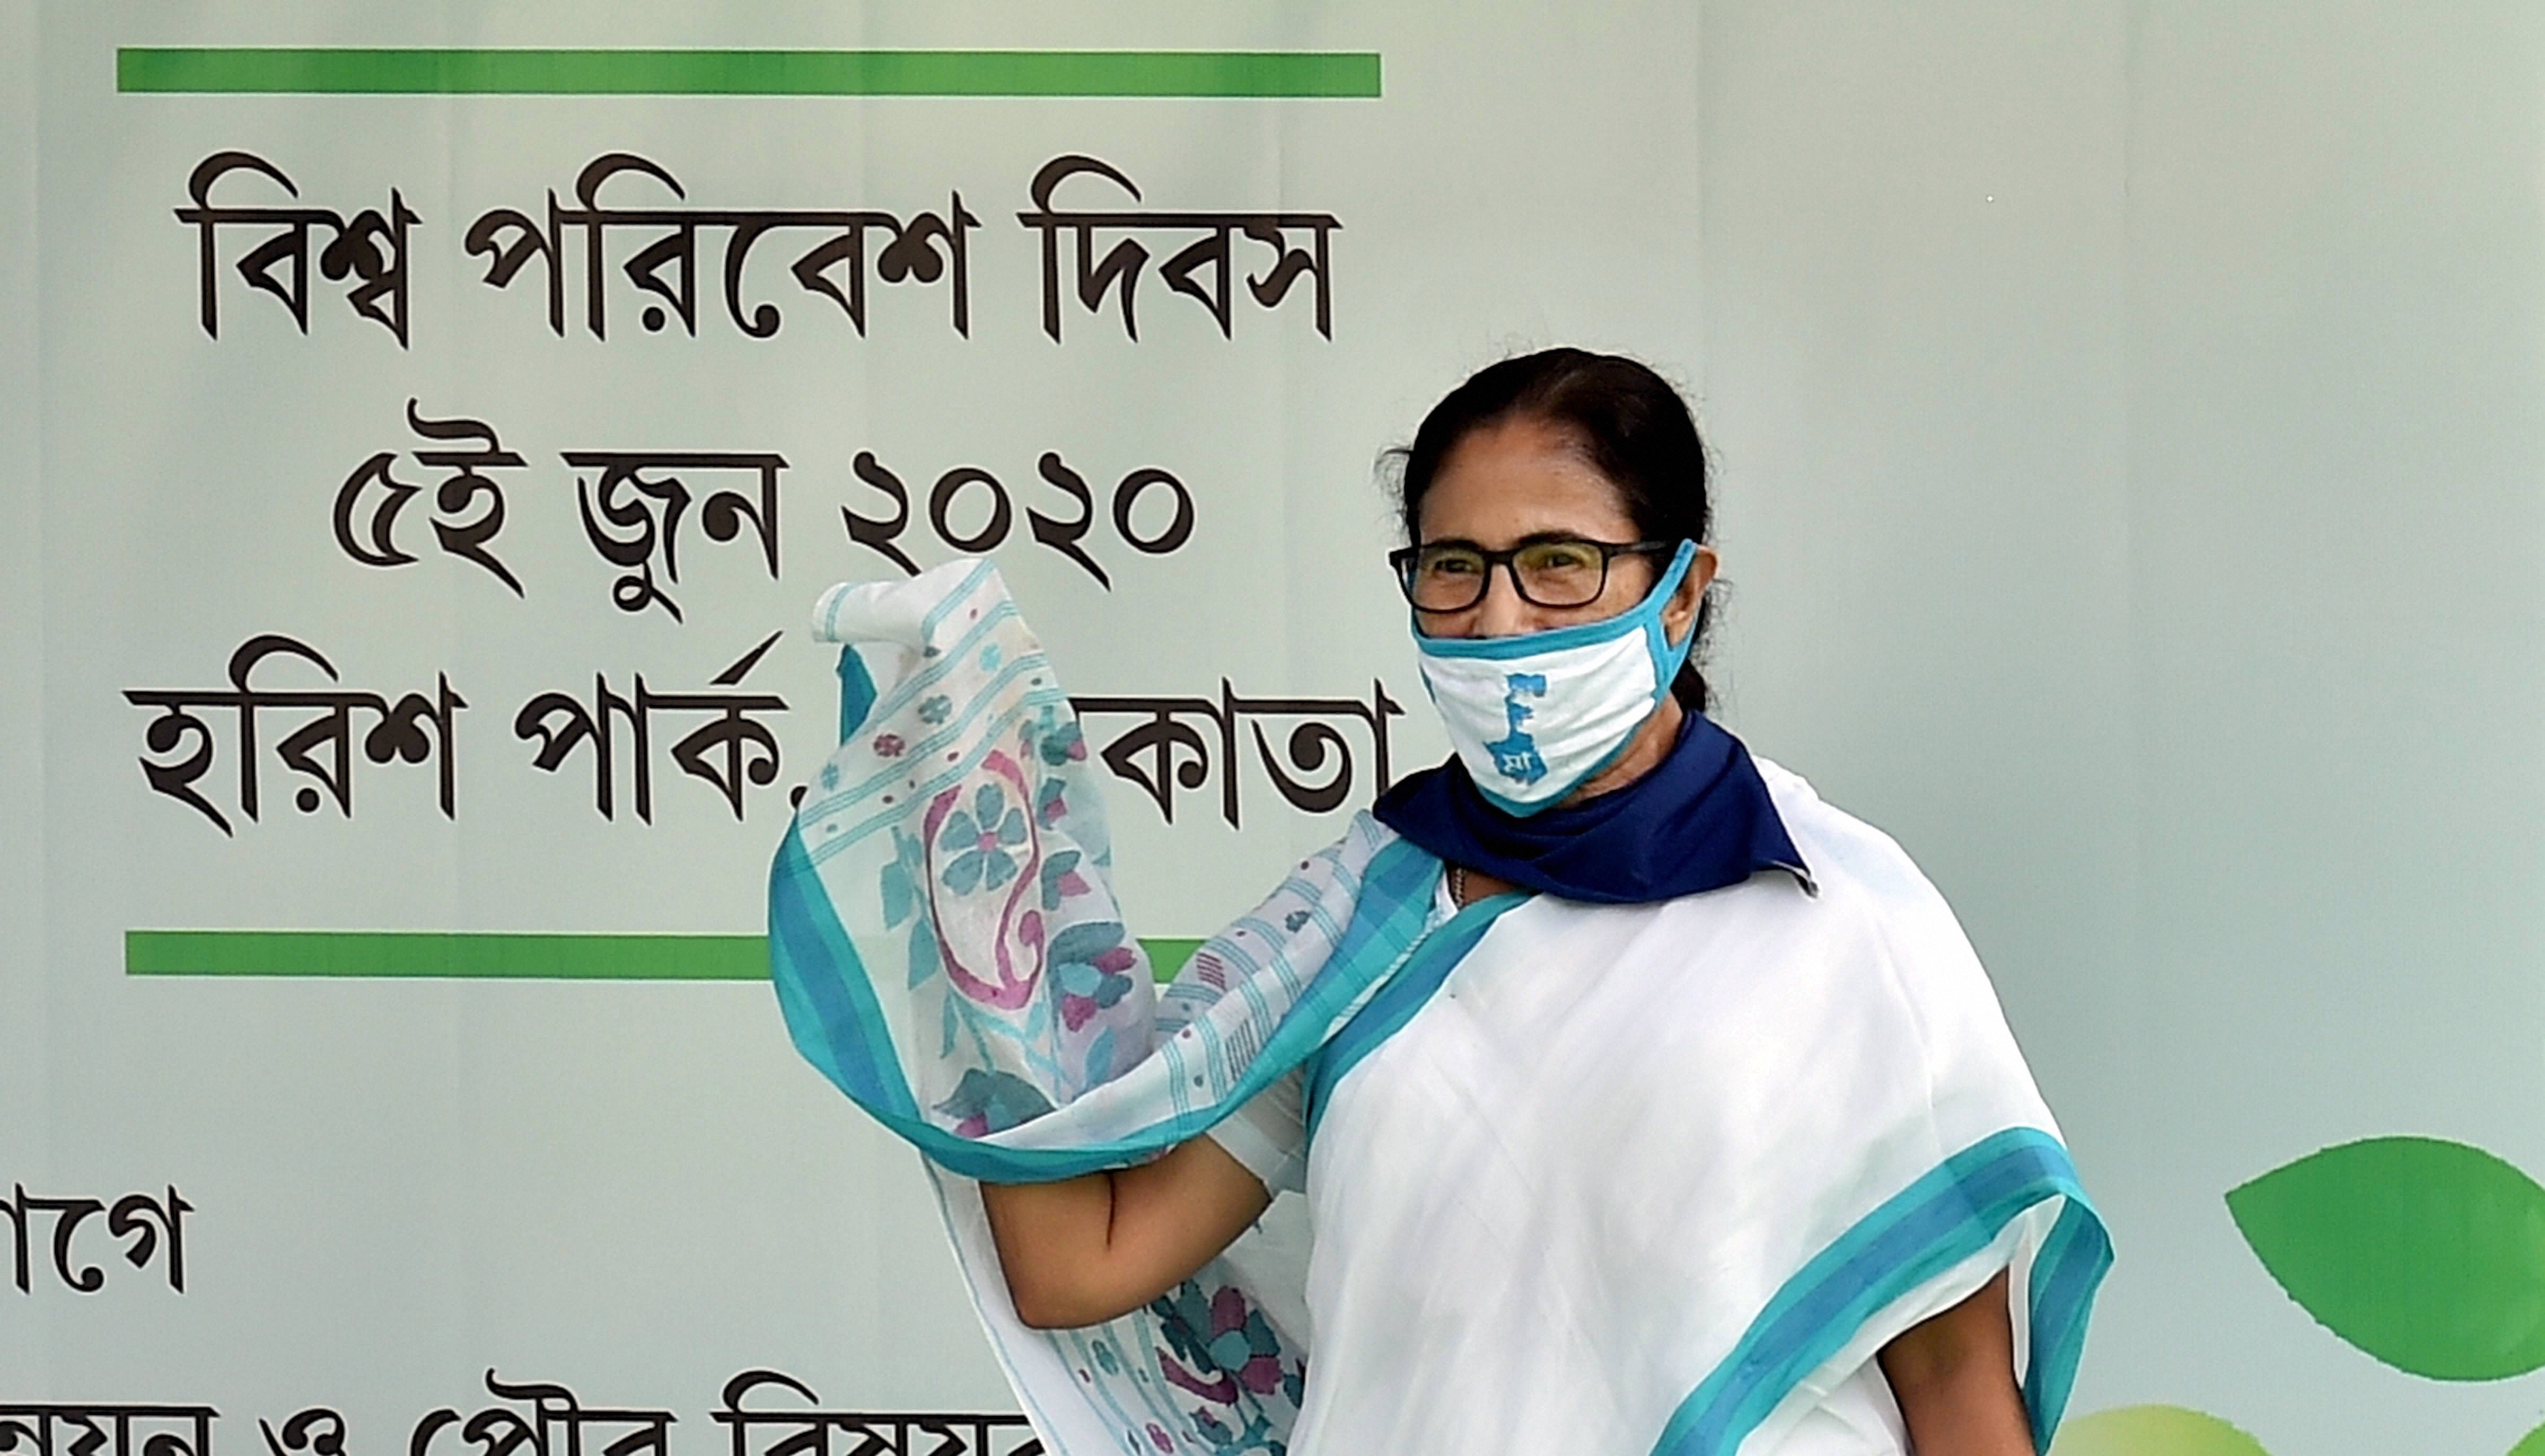 West Bengal Chief Minister Mamata Banerjee during the inauguration of Re-Greening project on the occasion of World Environment day, during nationwide Covid-19 lockdown, in Kolkata, Friday, June 5, 2020.